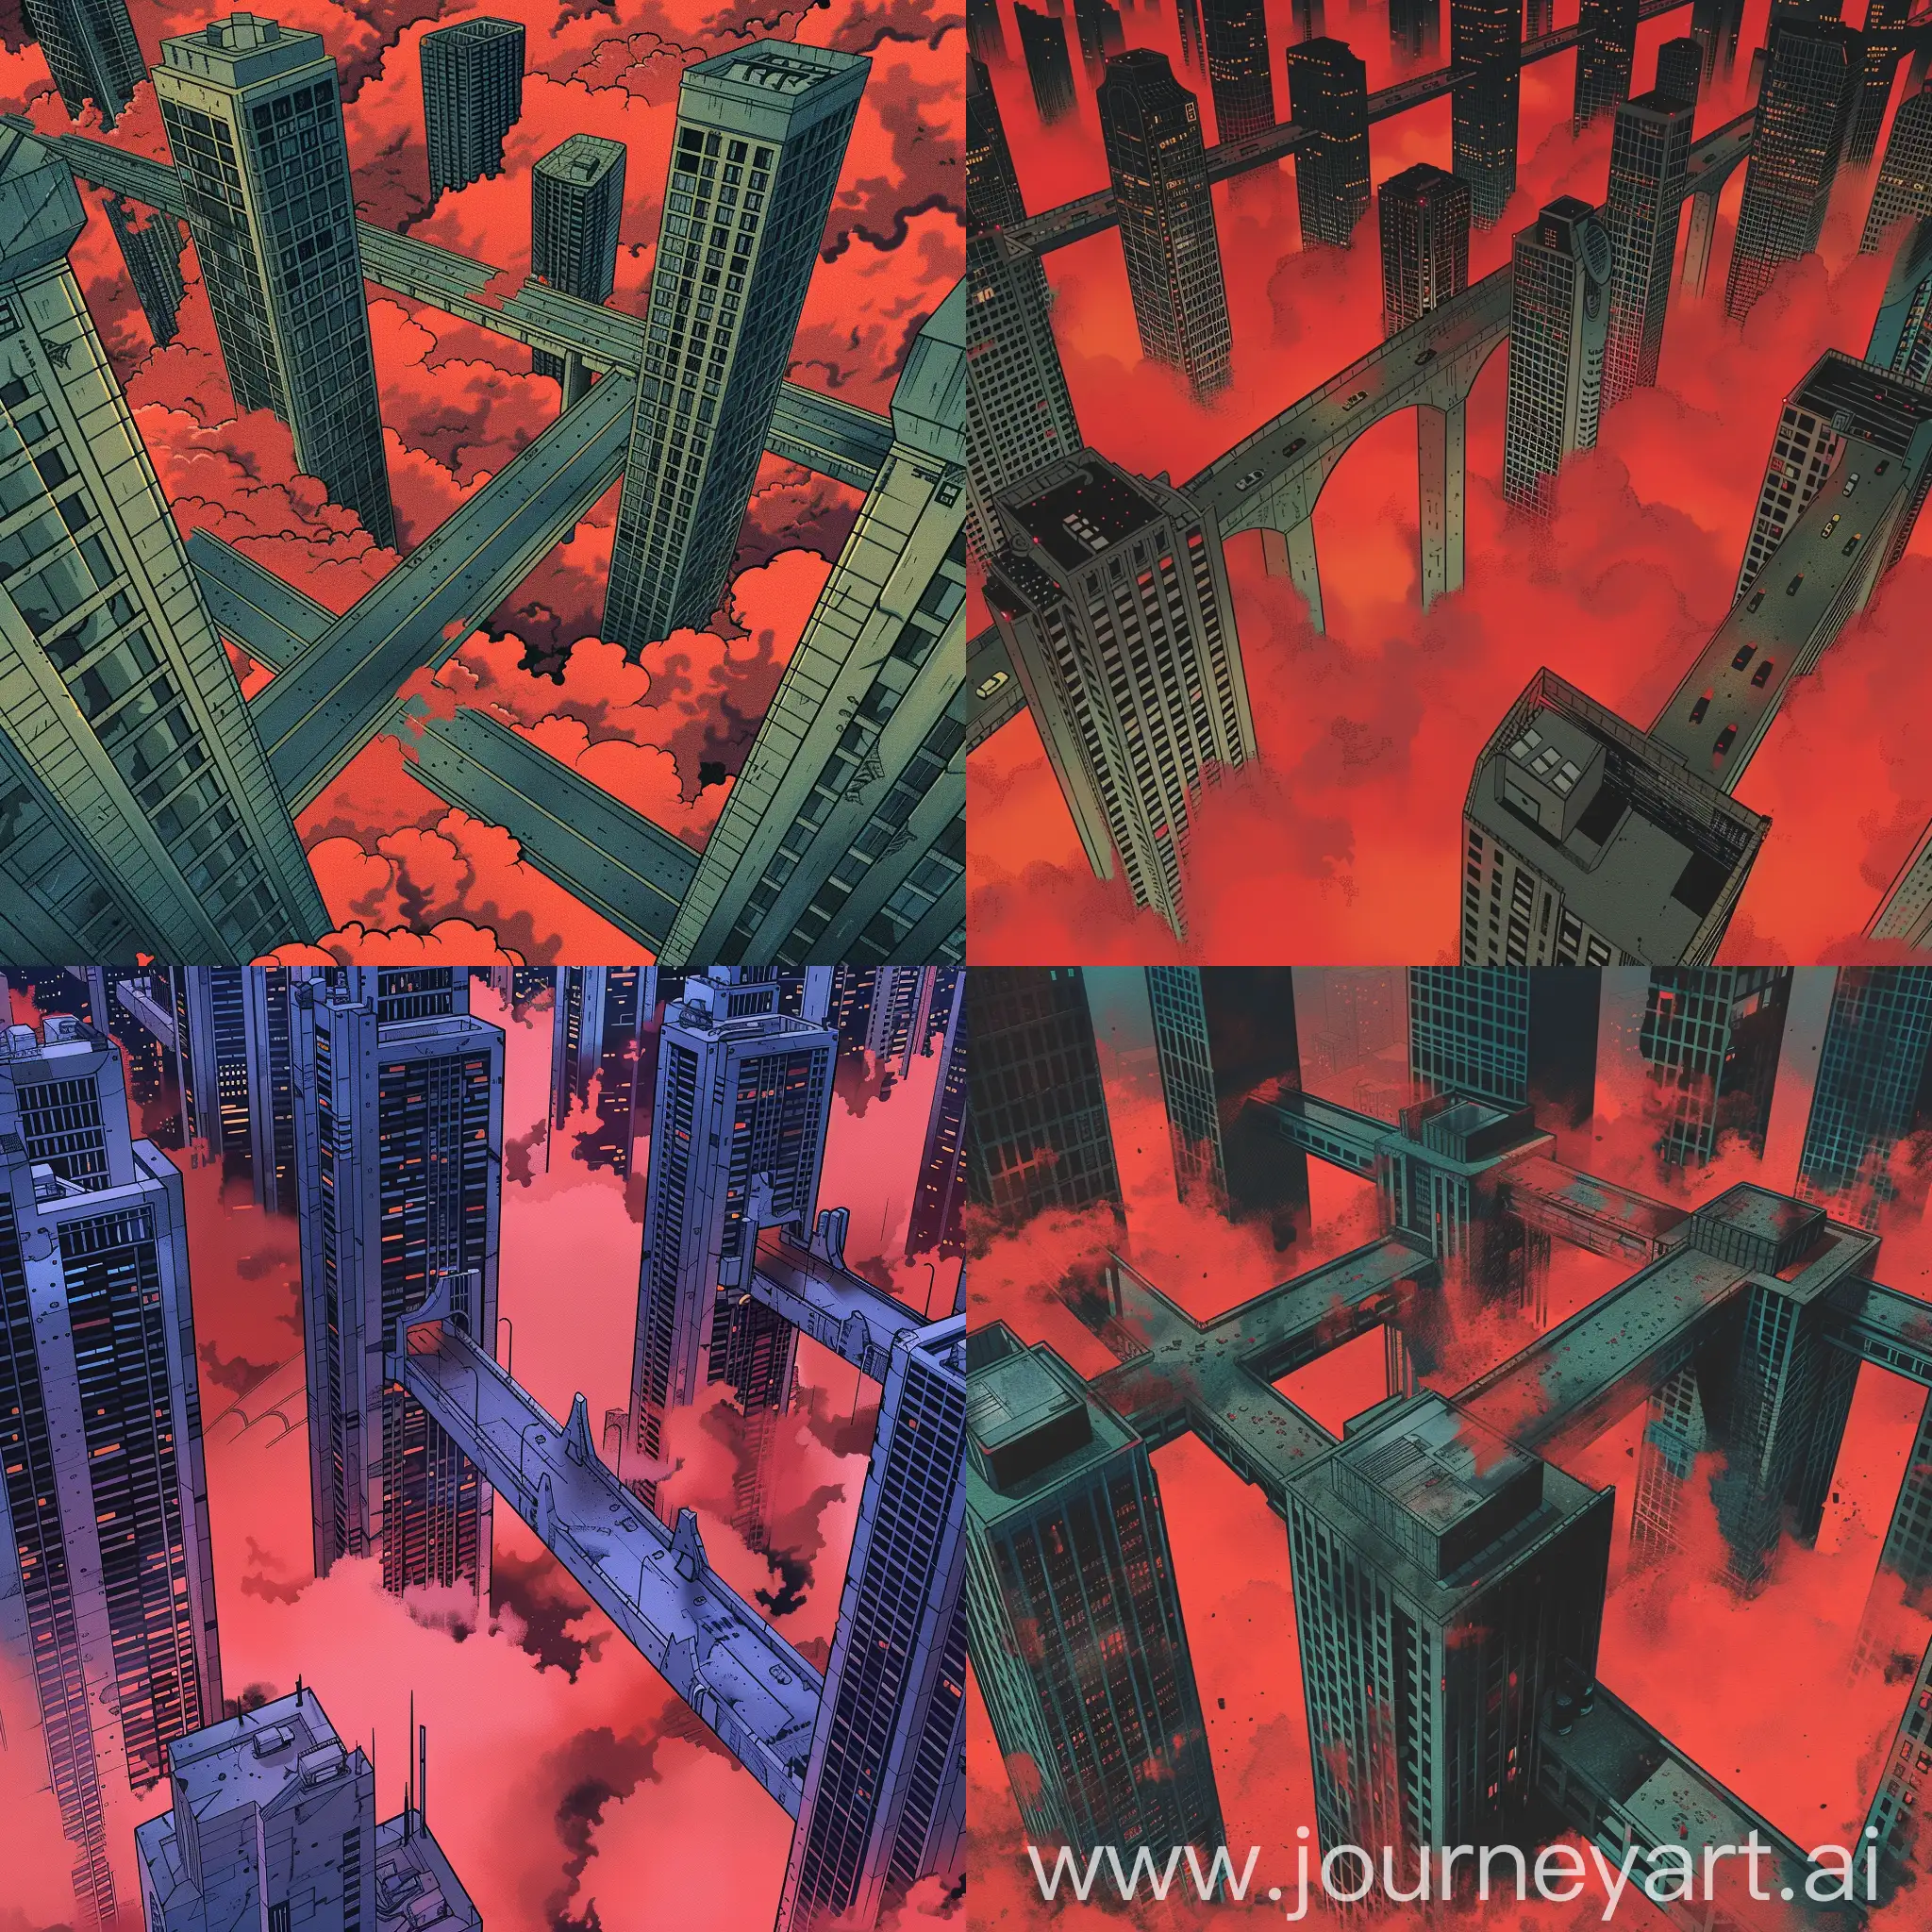 comics style, red fog, many skyscrapers, Concrete bridges are built between skyscrapers